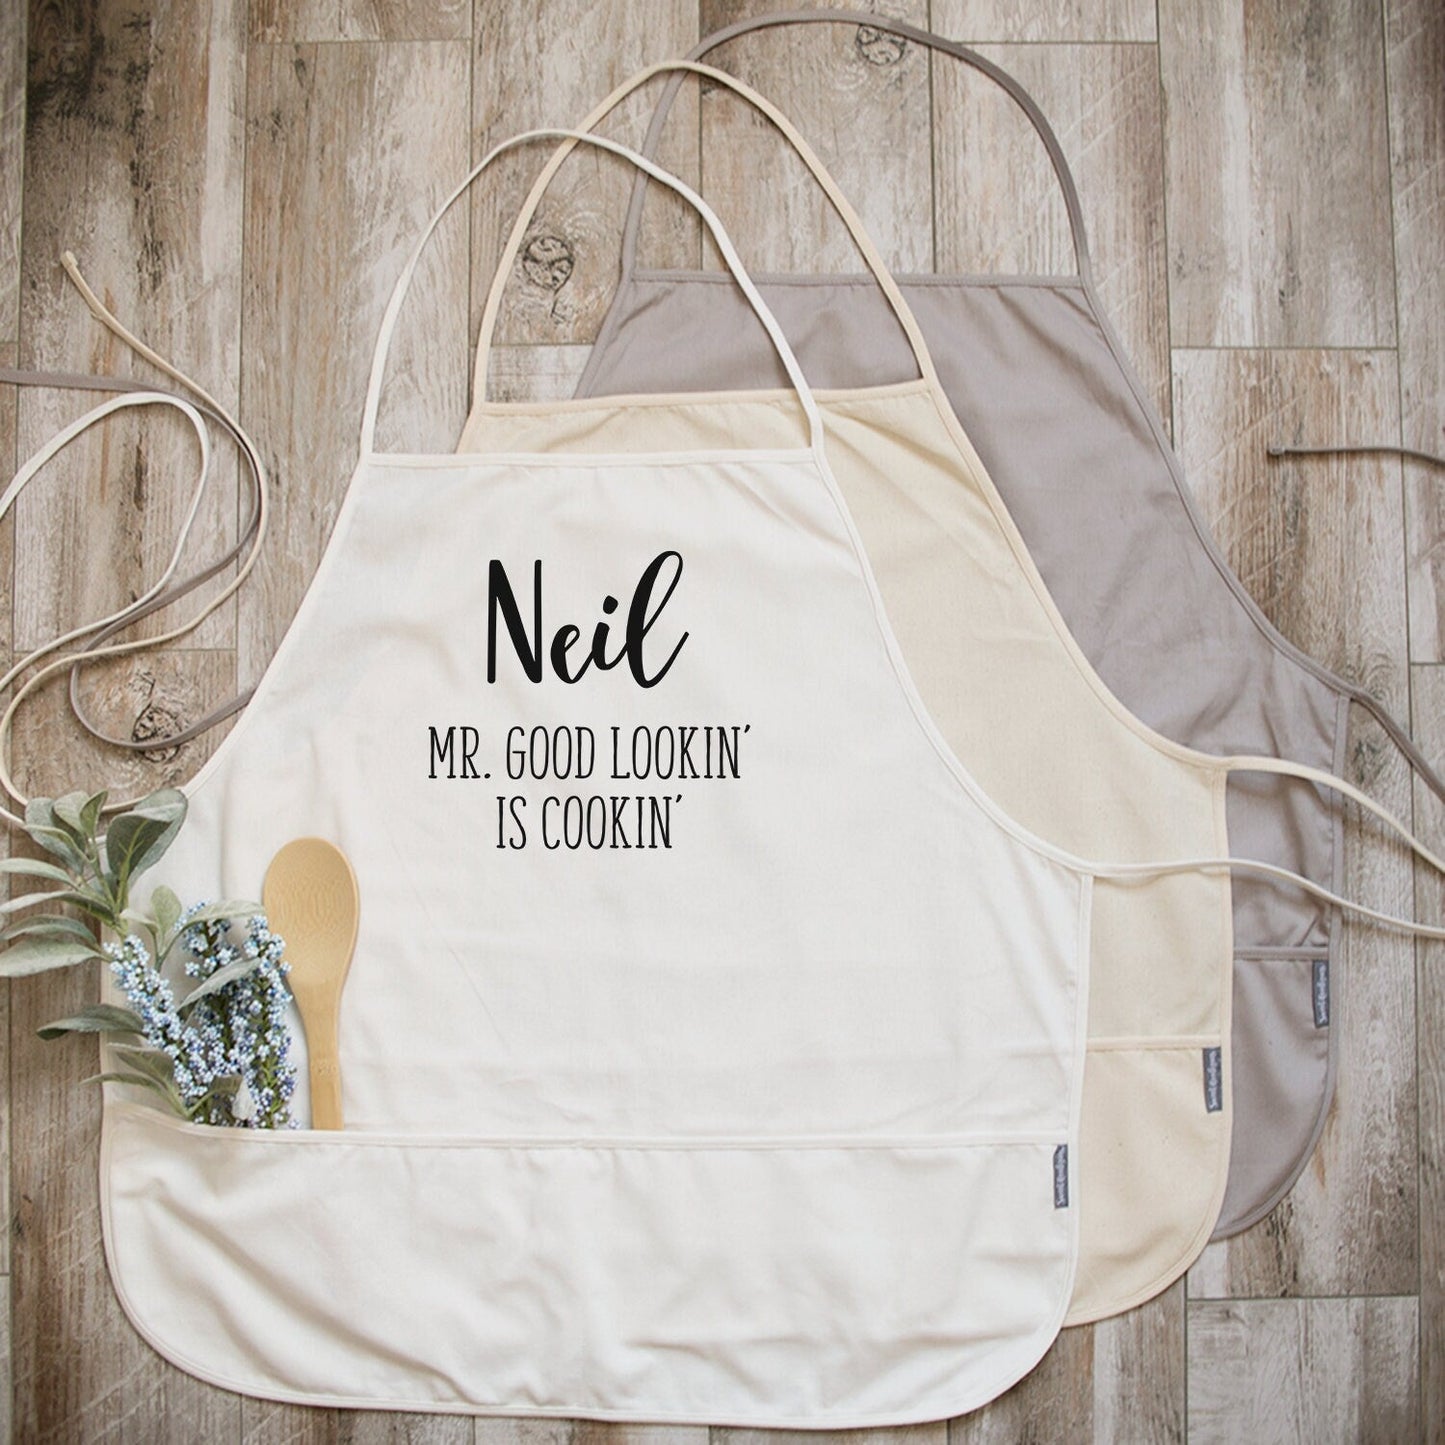 Load image into Gallery viewer, Mr. Good Lookin is Cookin | Grilling Apron | Funny Kitchen Apron for Dad | Fathers Day Apron Gift | BBQ Grill Gift for Dad | Personalized
